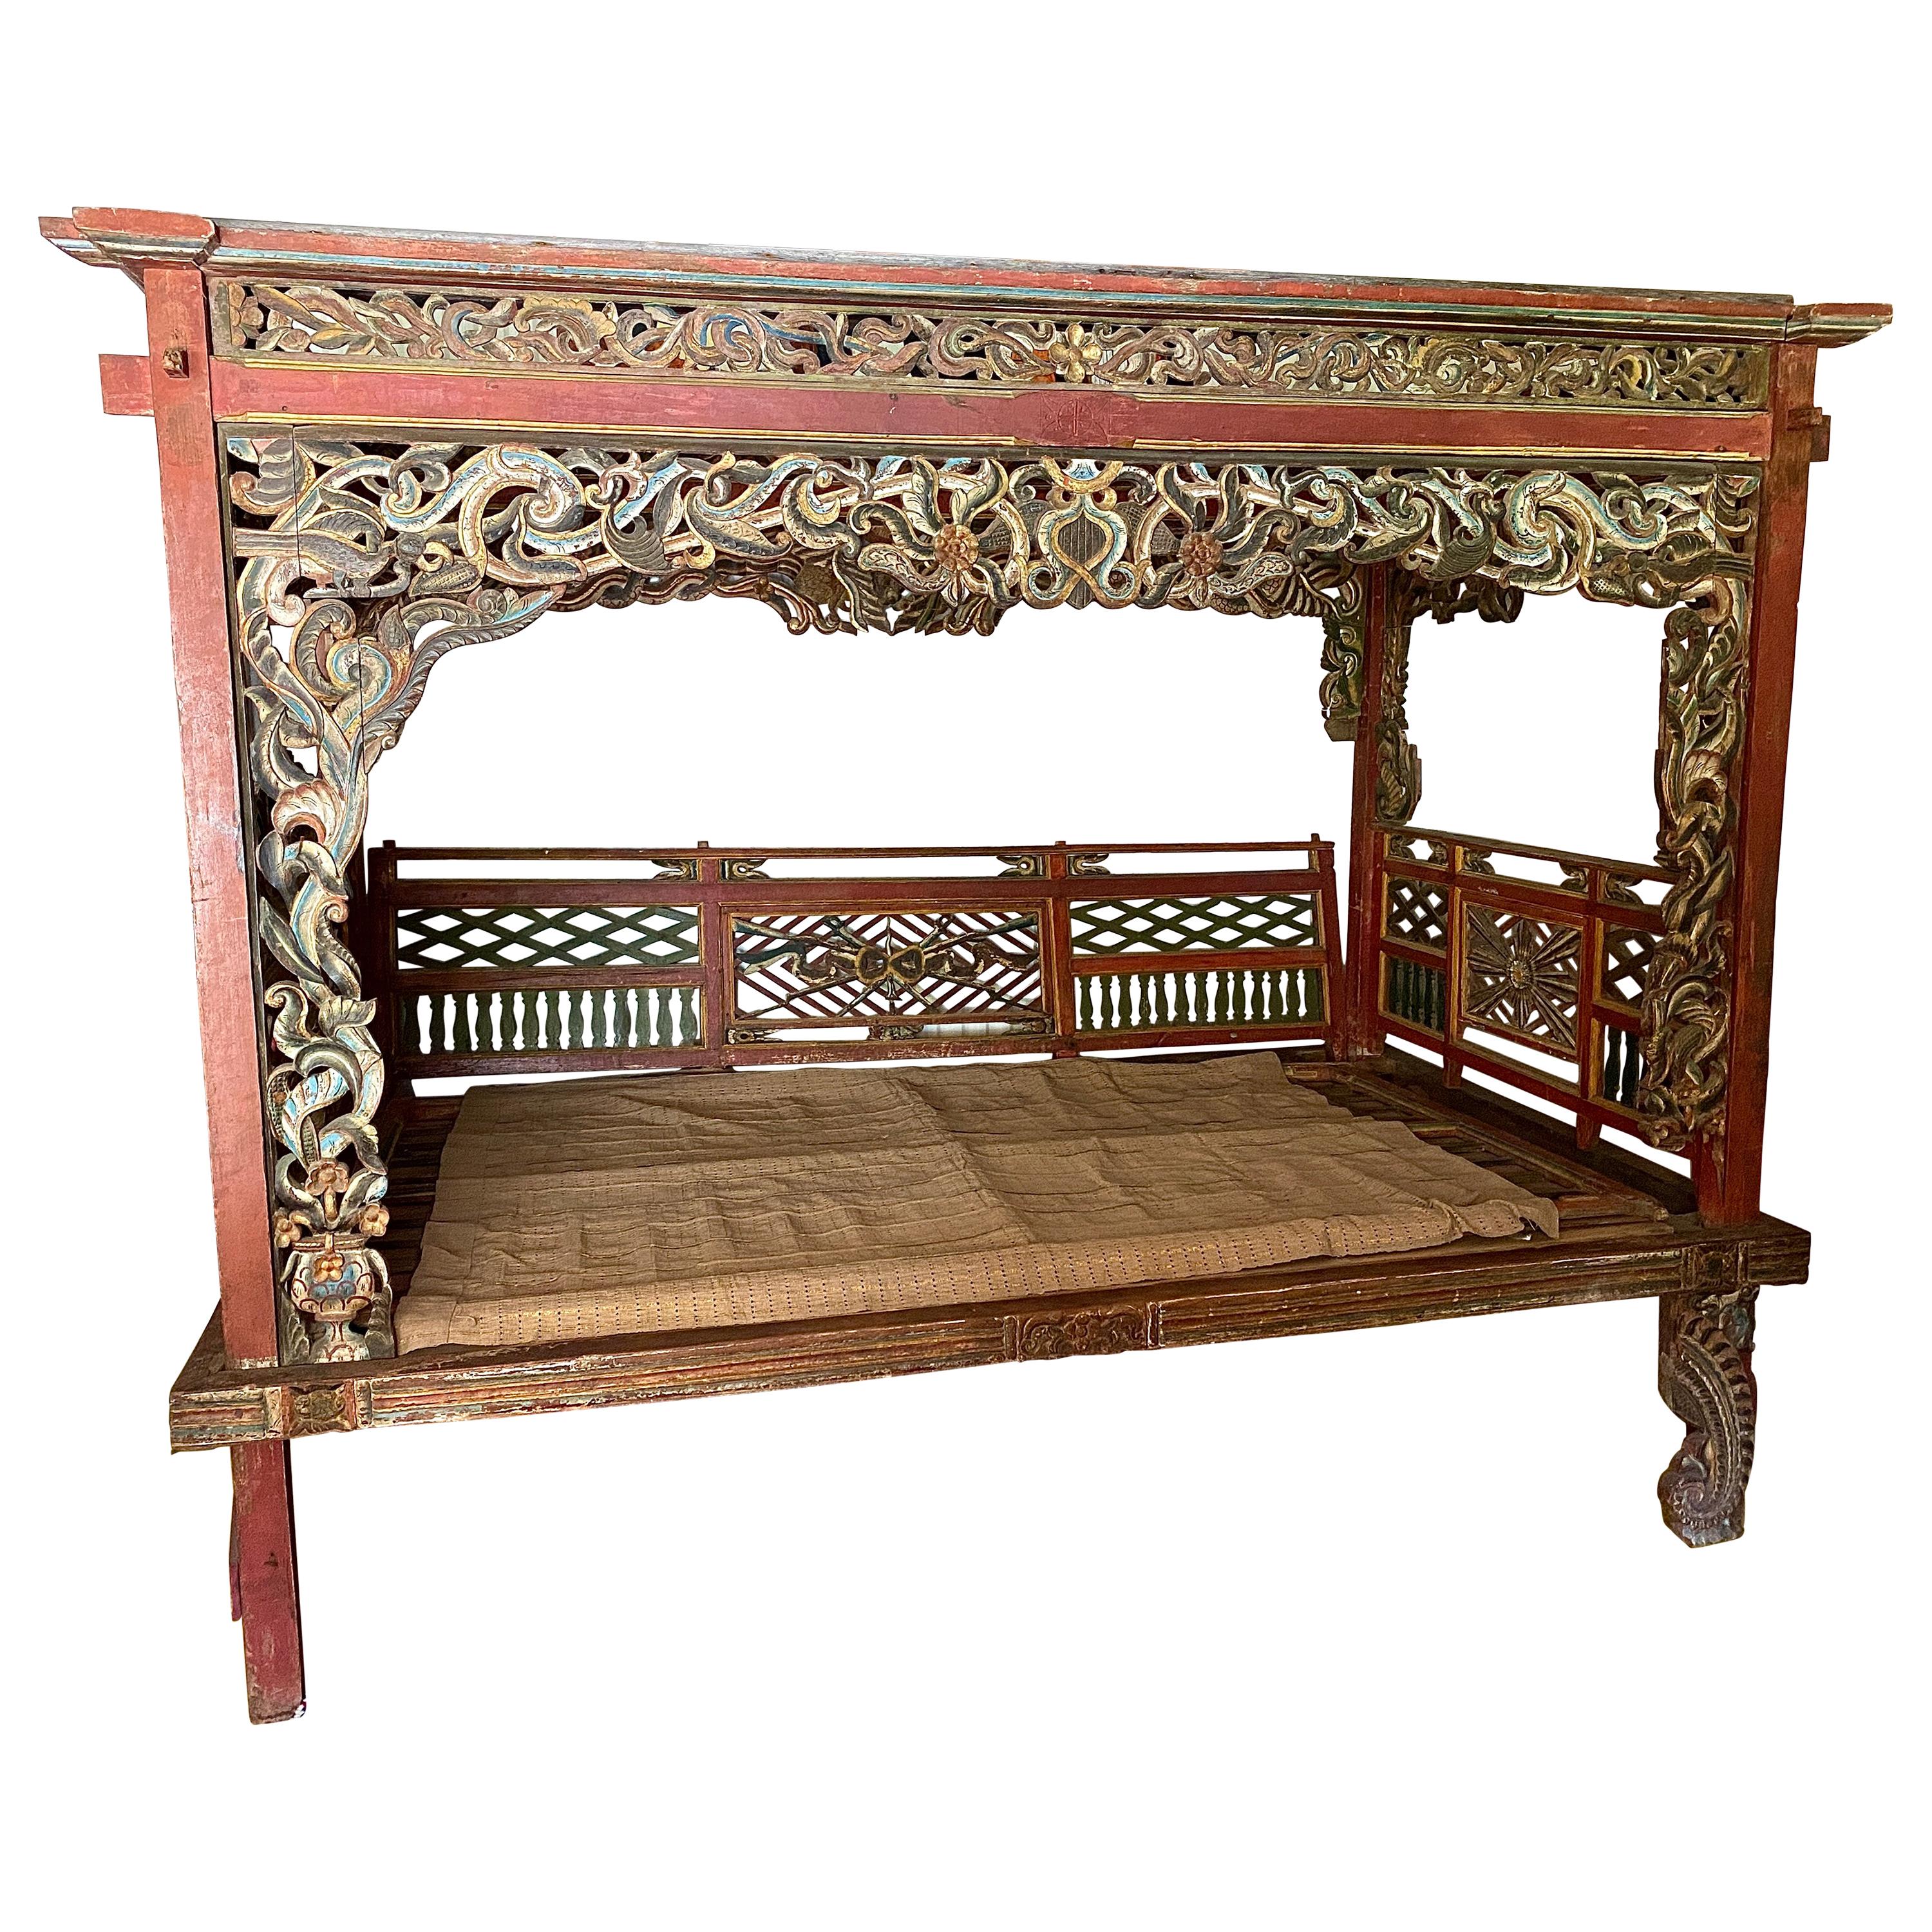 Early 20th Century Indonesian Ceremonial Wedding Bed For Sale at 1stDibs |  indonesian wedding bed, indonesian bed frame, indonesian beds